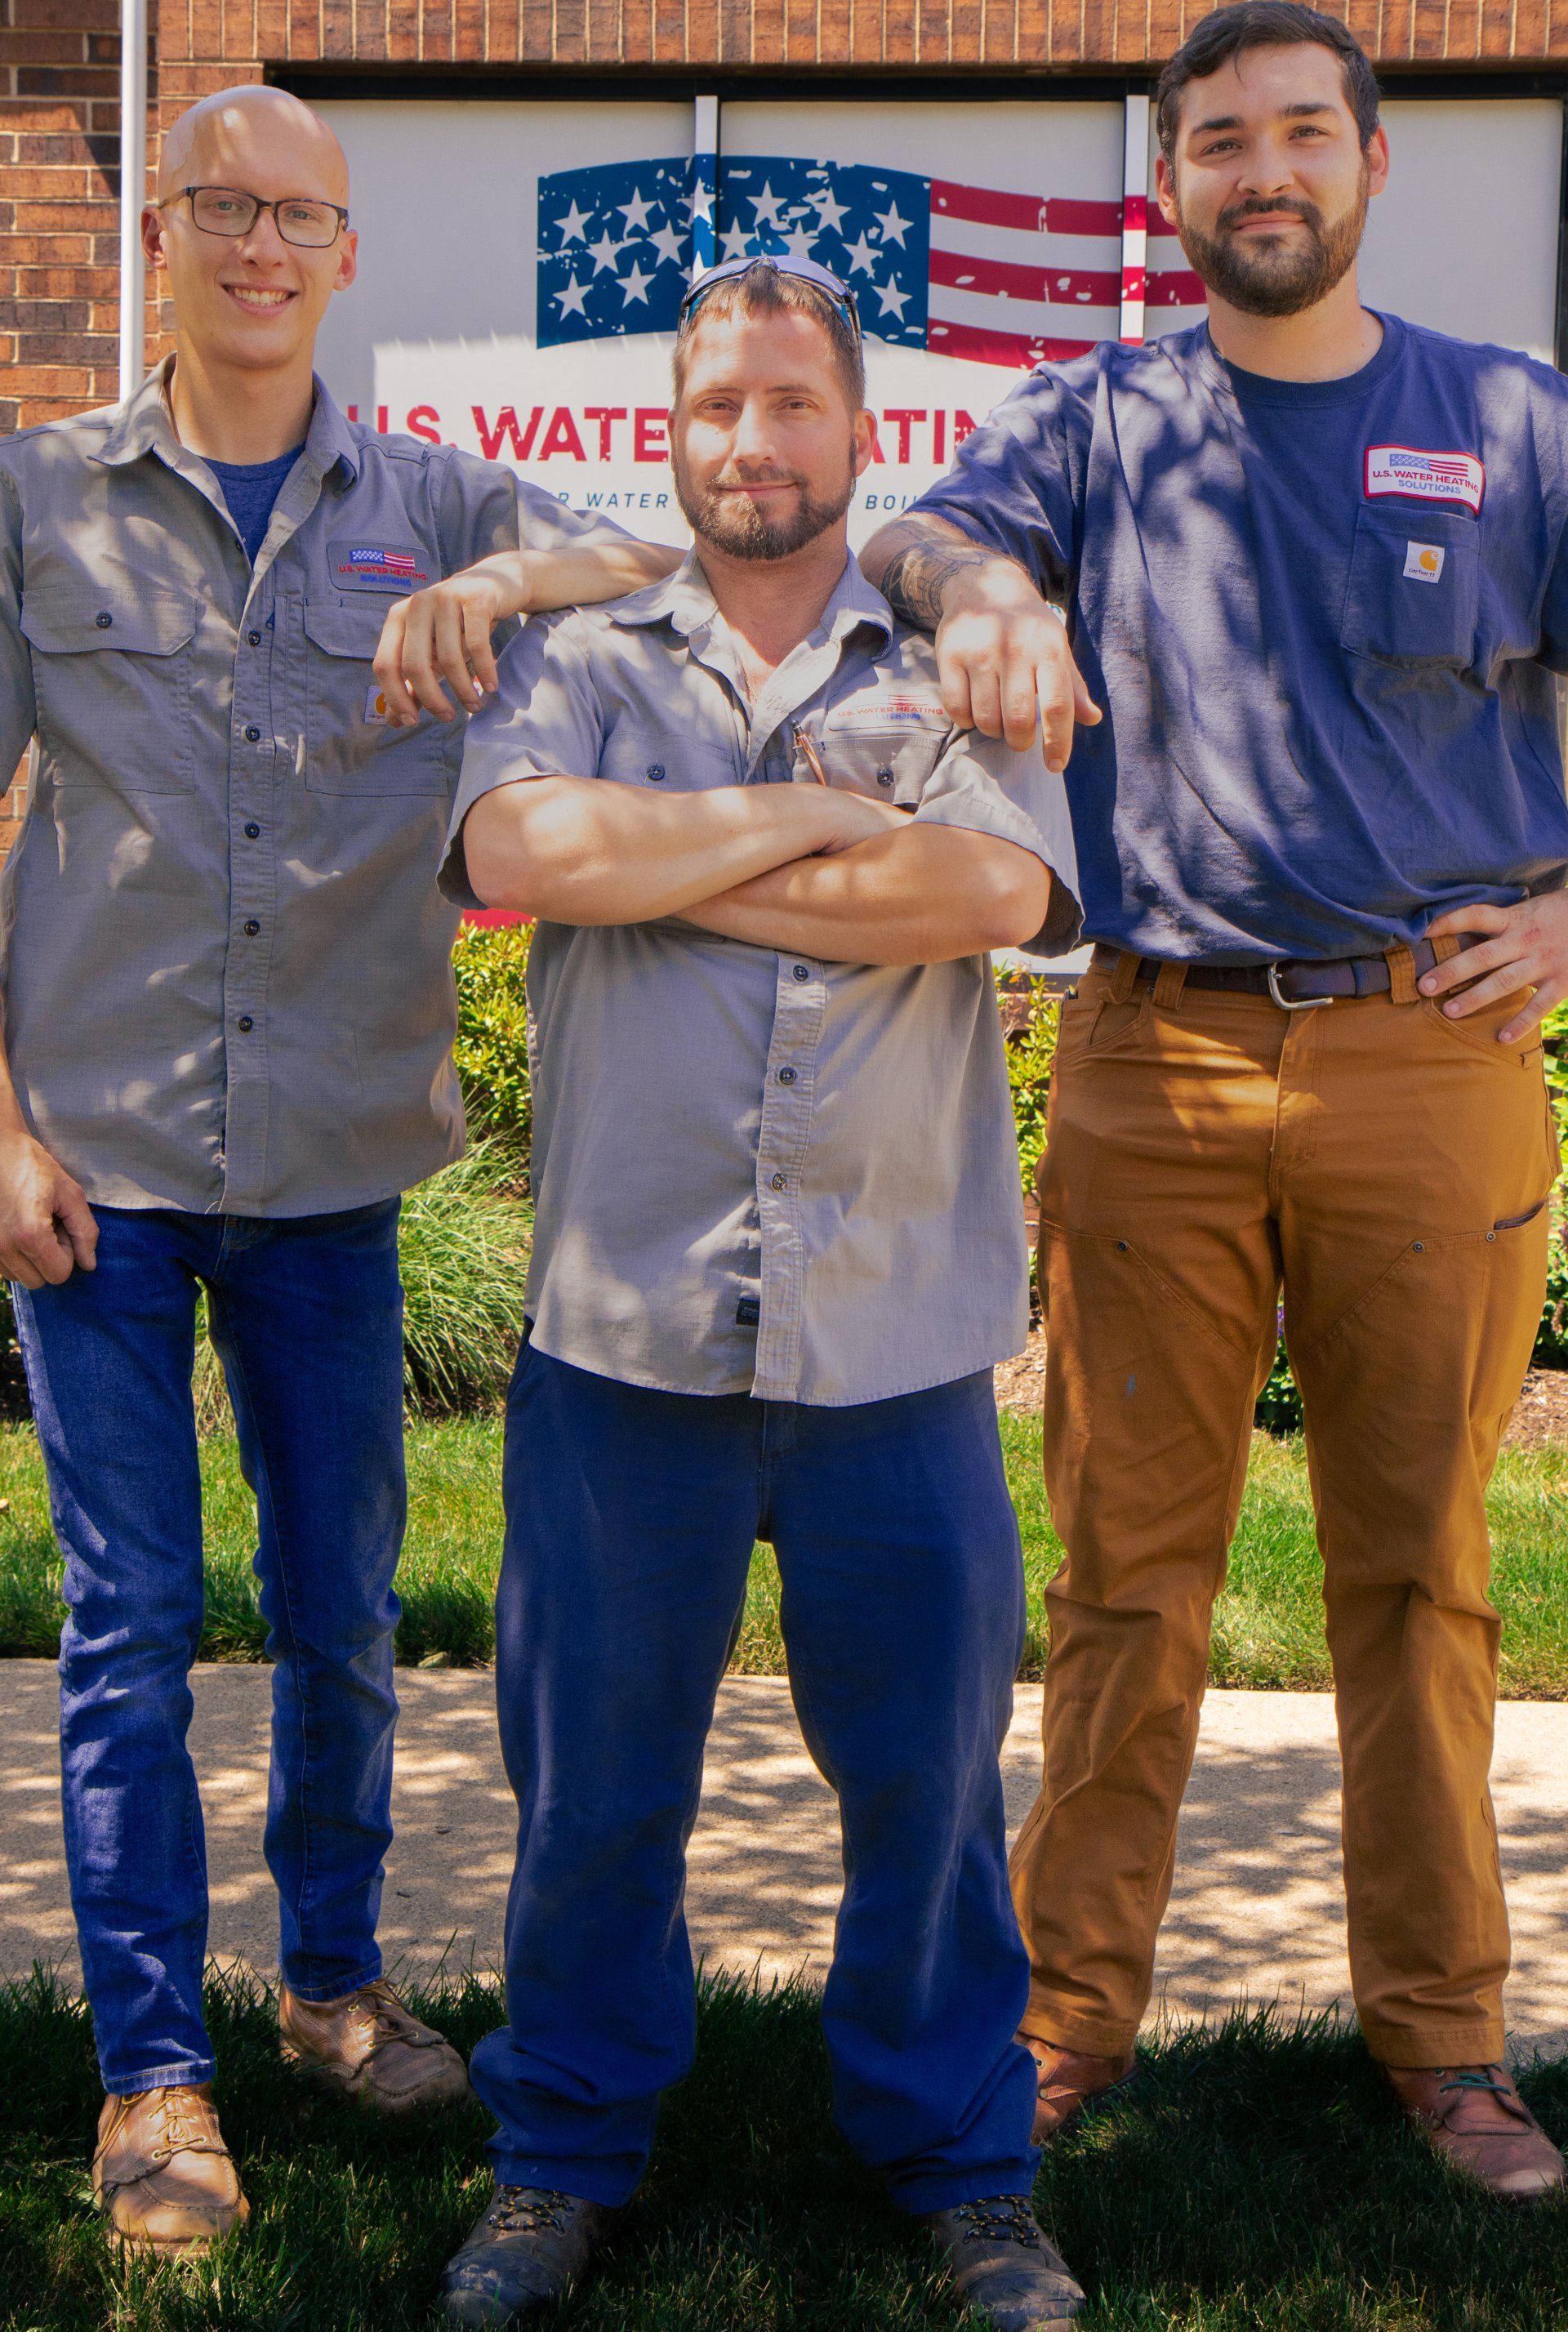 Three water heater service technicians pose in front of U.S. Water Heating Solutions office